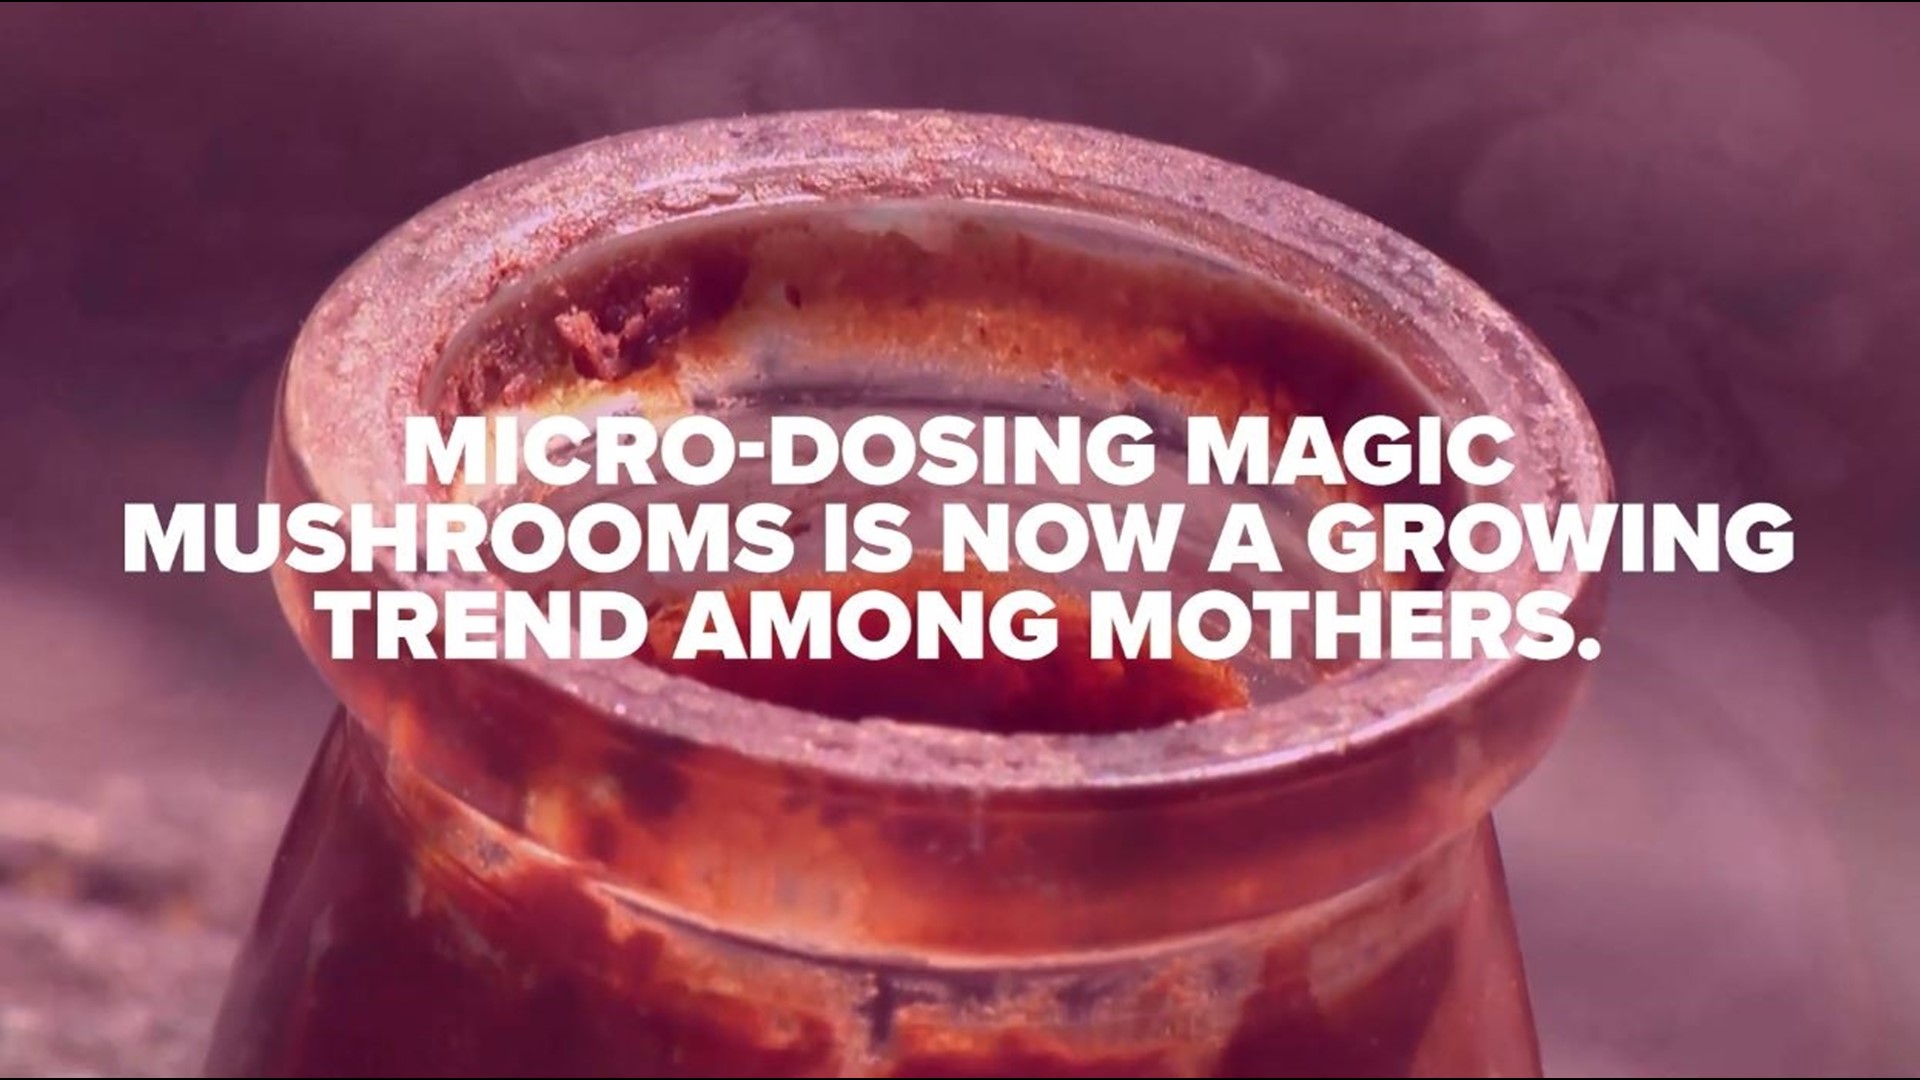 Extended interviews looking into a growing trend among mothers: micro-dosing magic mushrooms. KFMB spoke with one mom and one researcher about the new trend